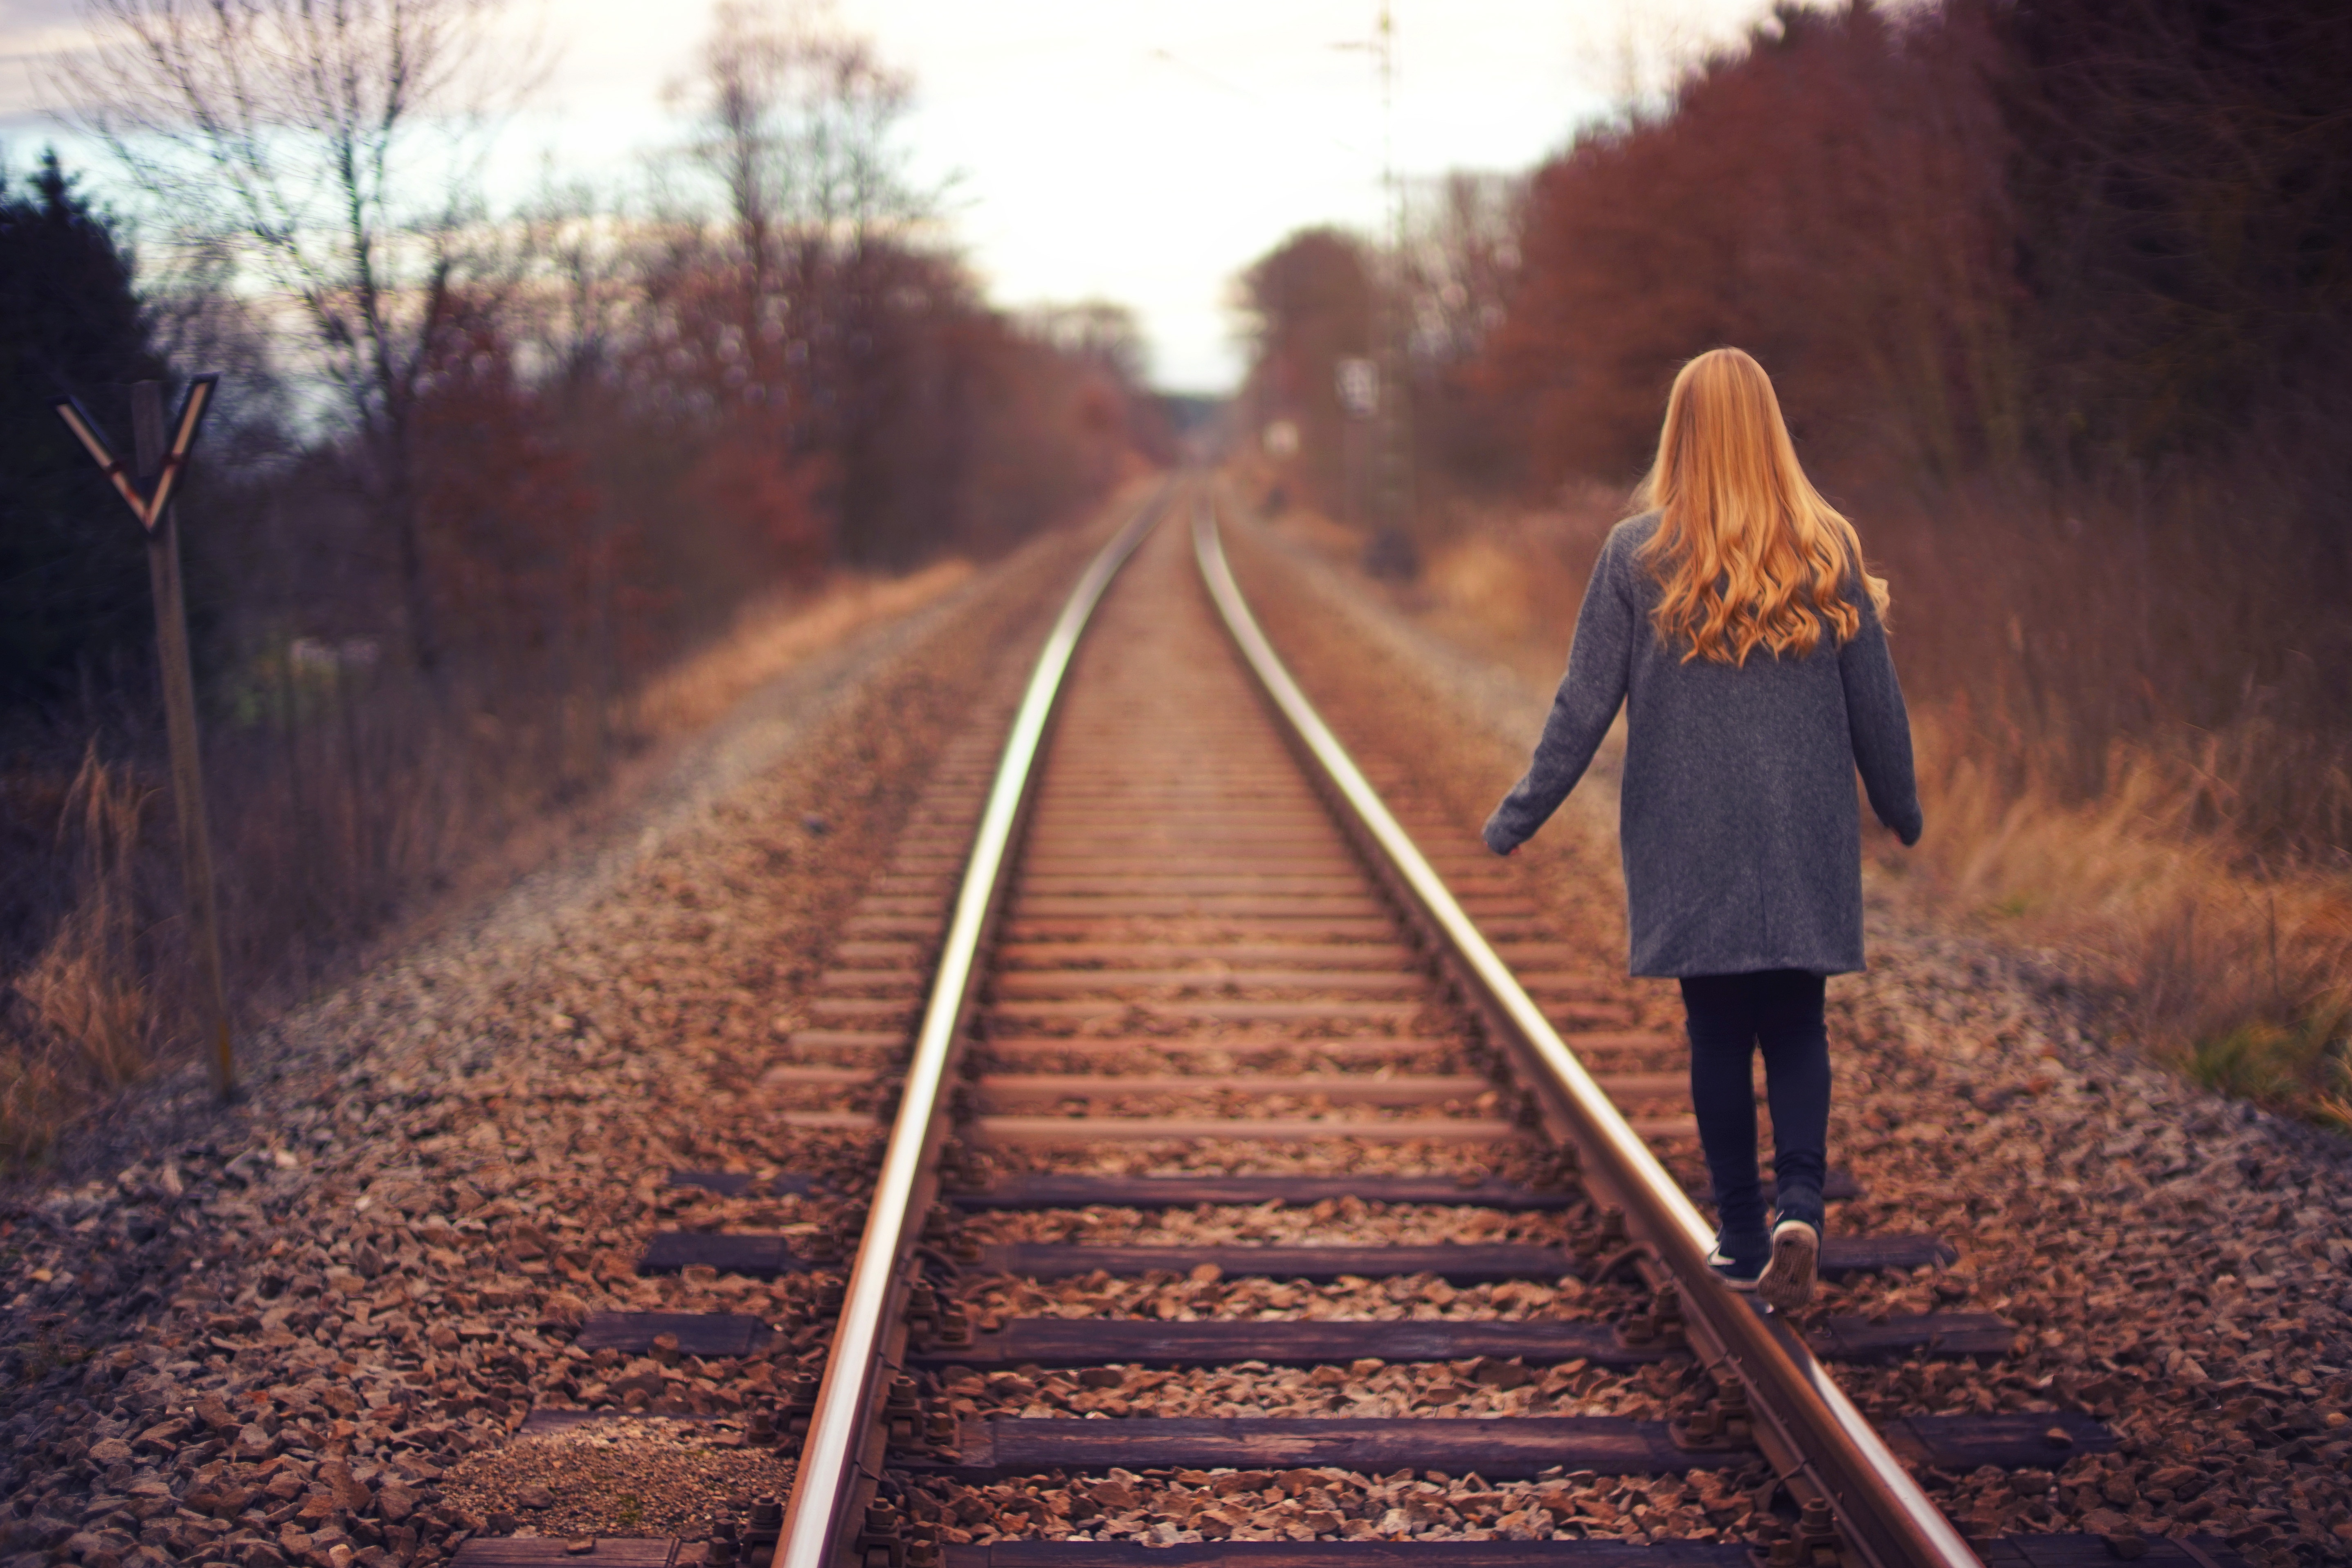 sexual abuse in Phoenix, Arizona - back of a youngster walking on railroad tracks